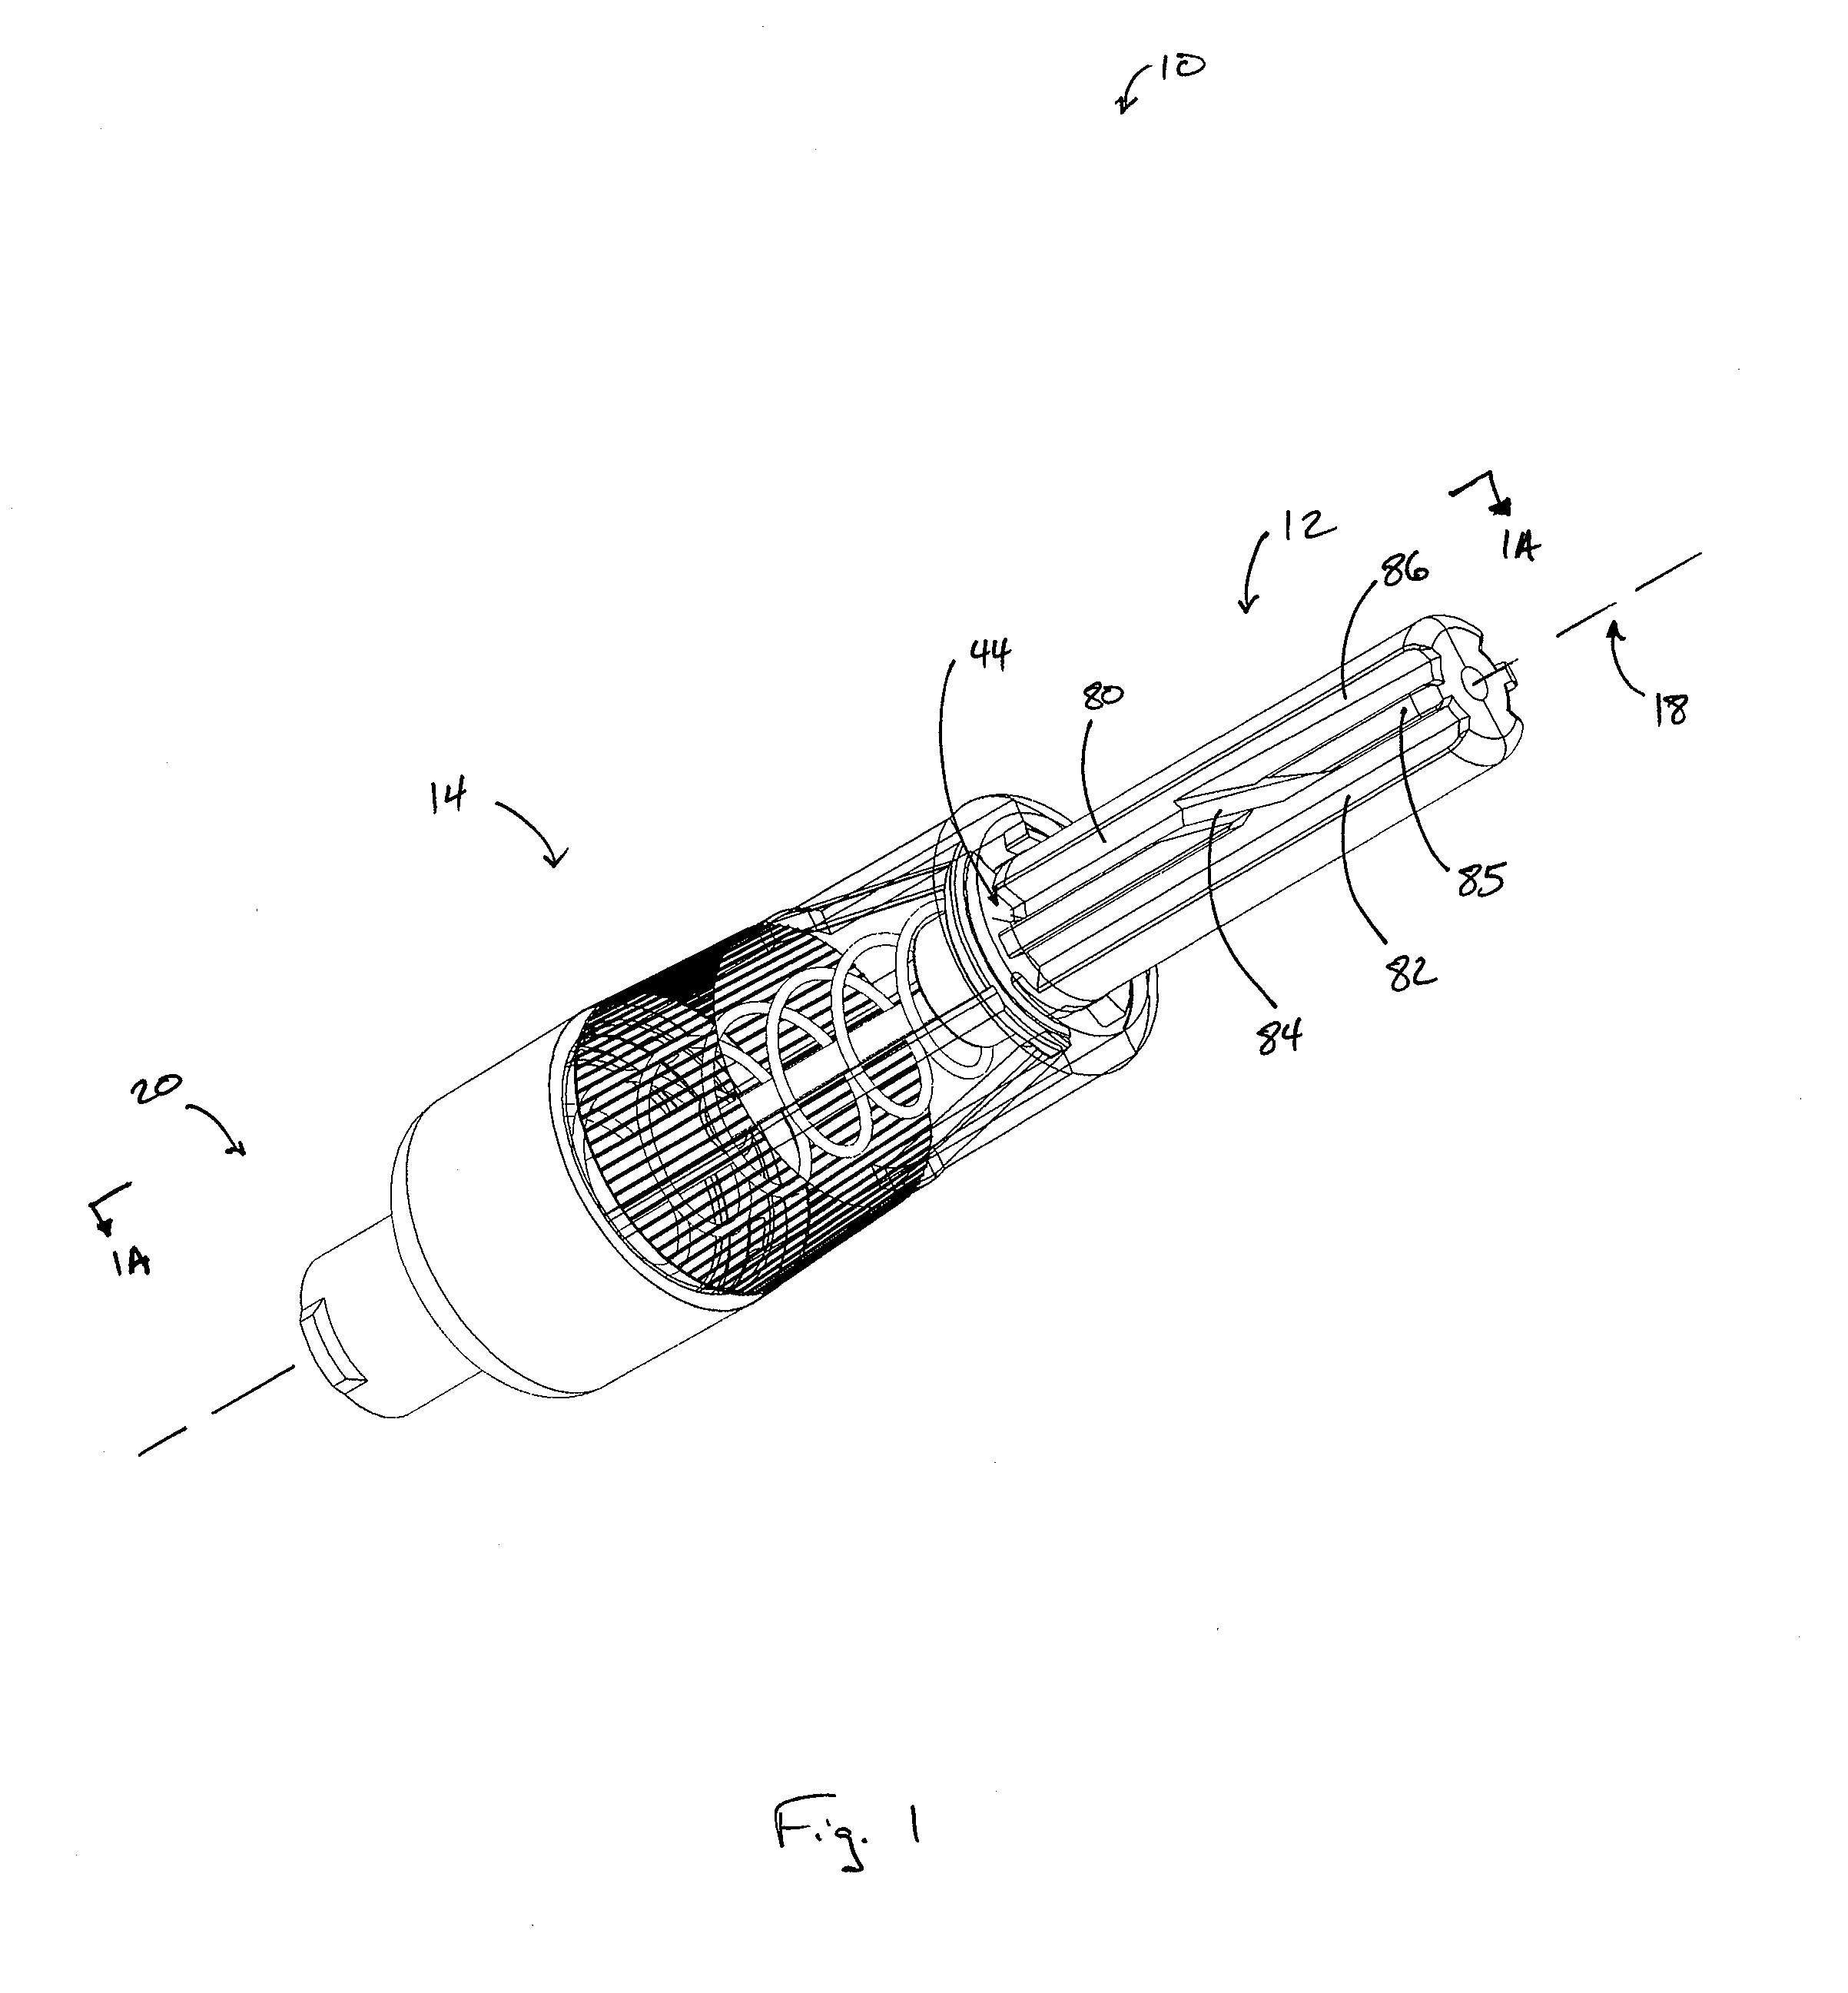 Automatic-locking safety needle covers and methods of use and manufacture